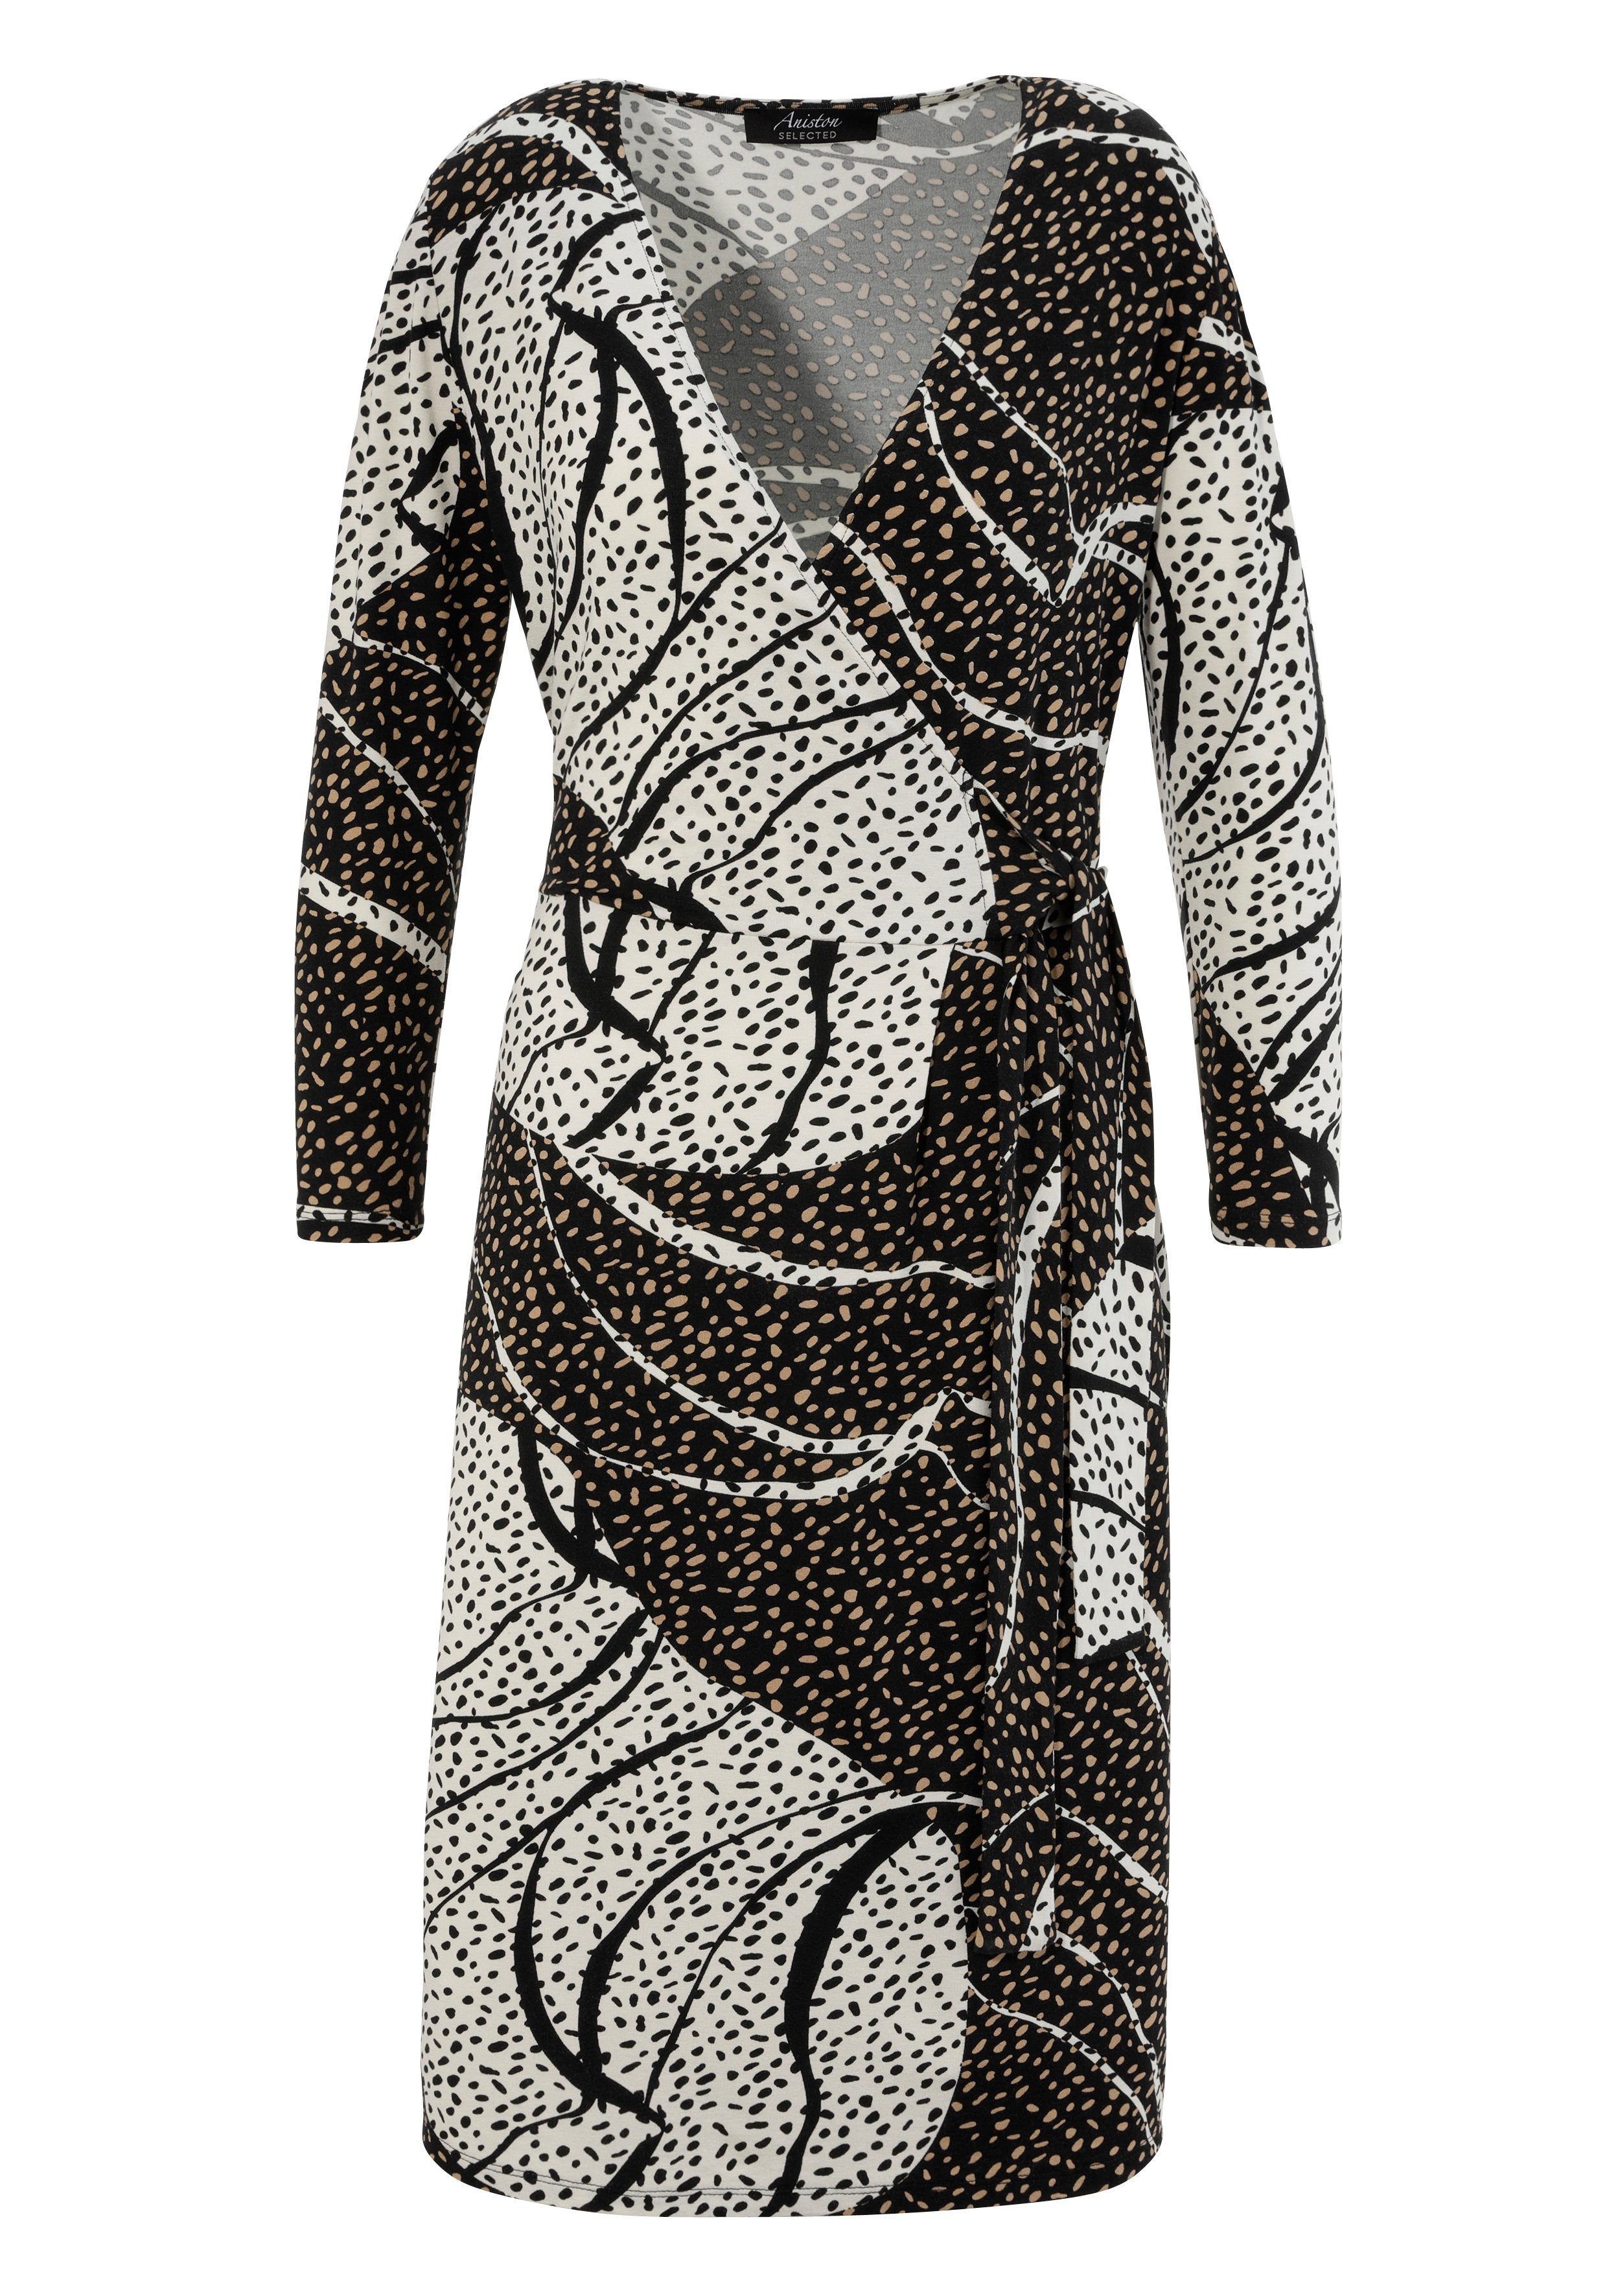 Jerseykleid trendy SELECTED mit Aniston Allover-Muster